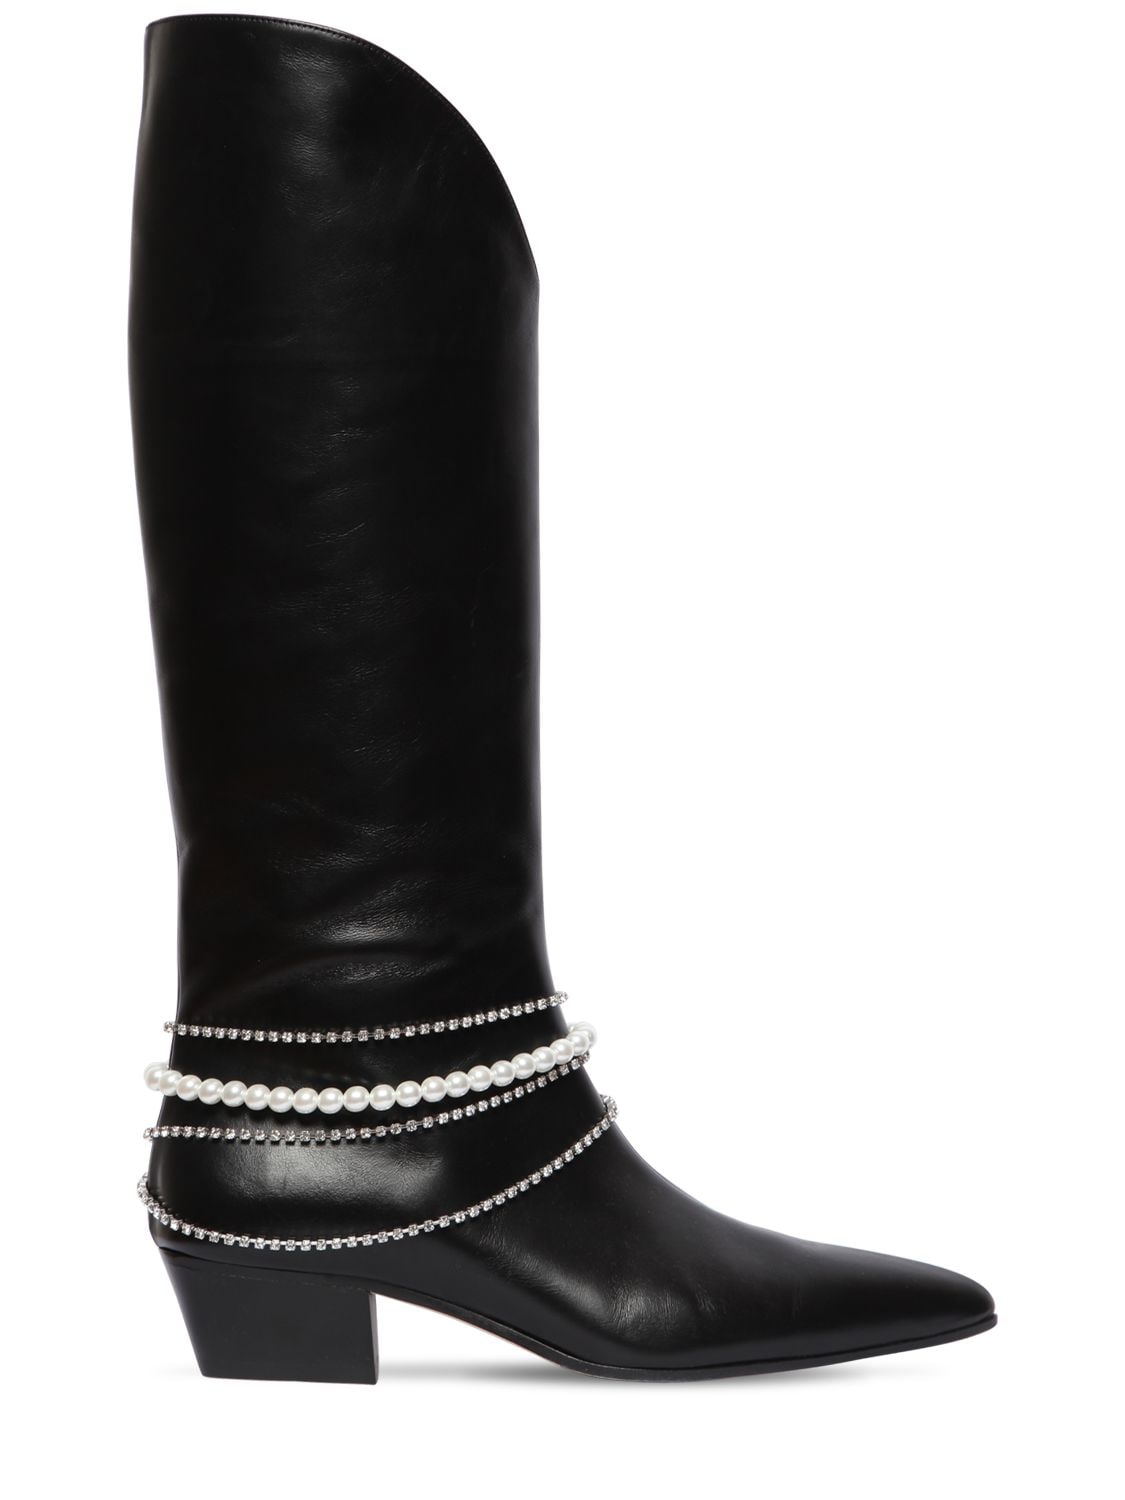 MAGDA BUTRYM 30mm Mexico Embellished Leather Boots